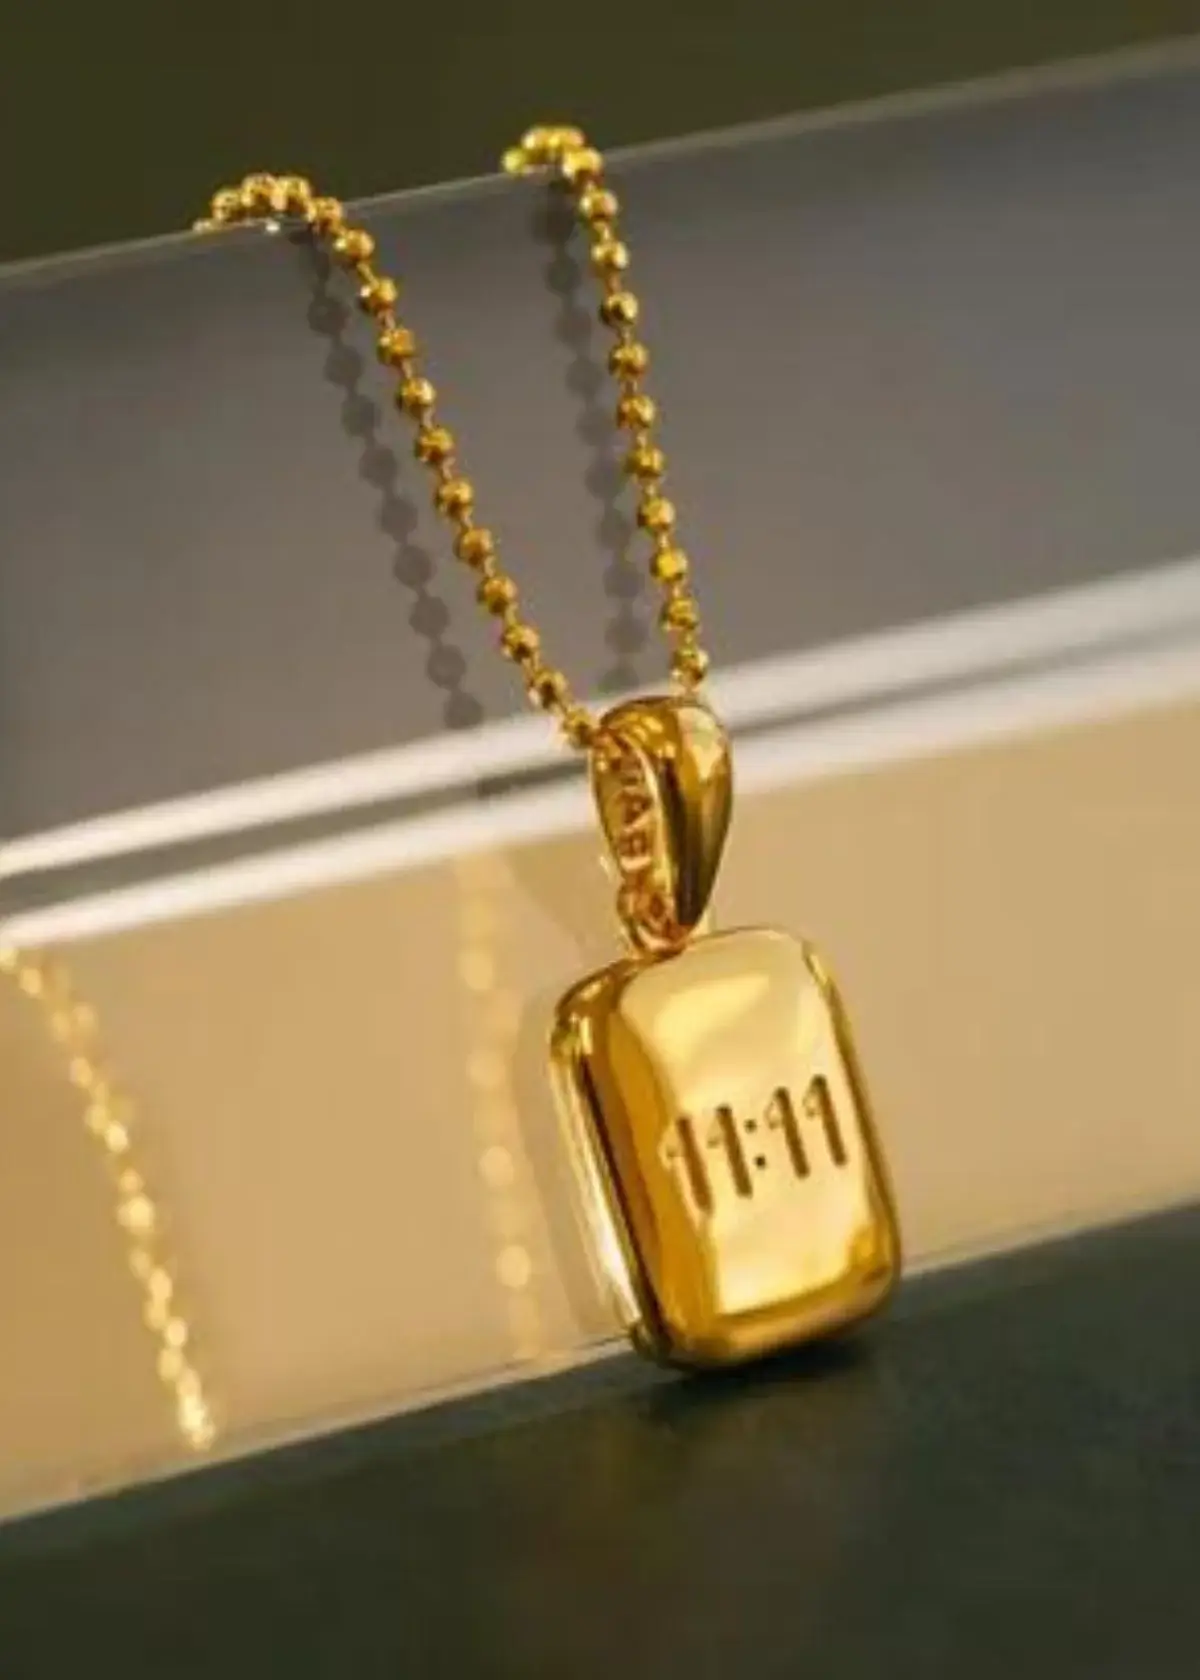 How to choose the right 11 11 necklace?